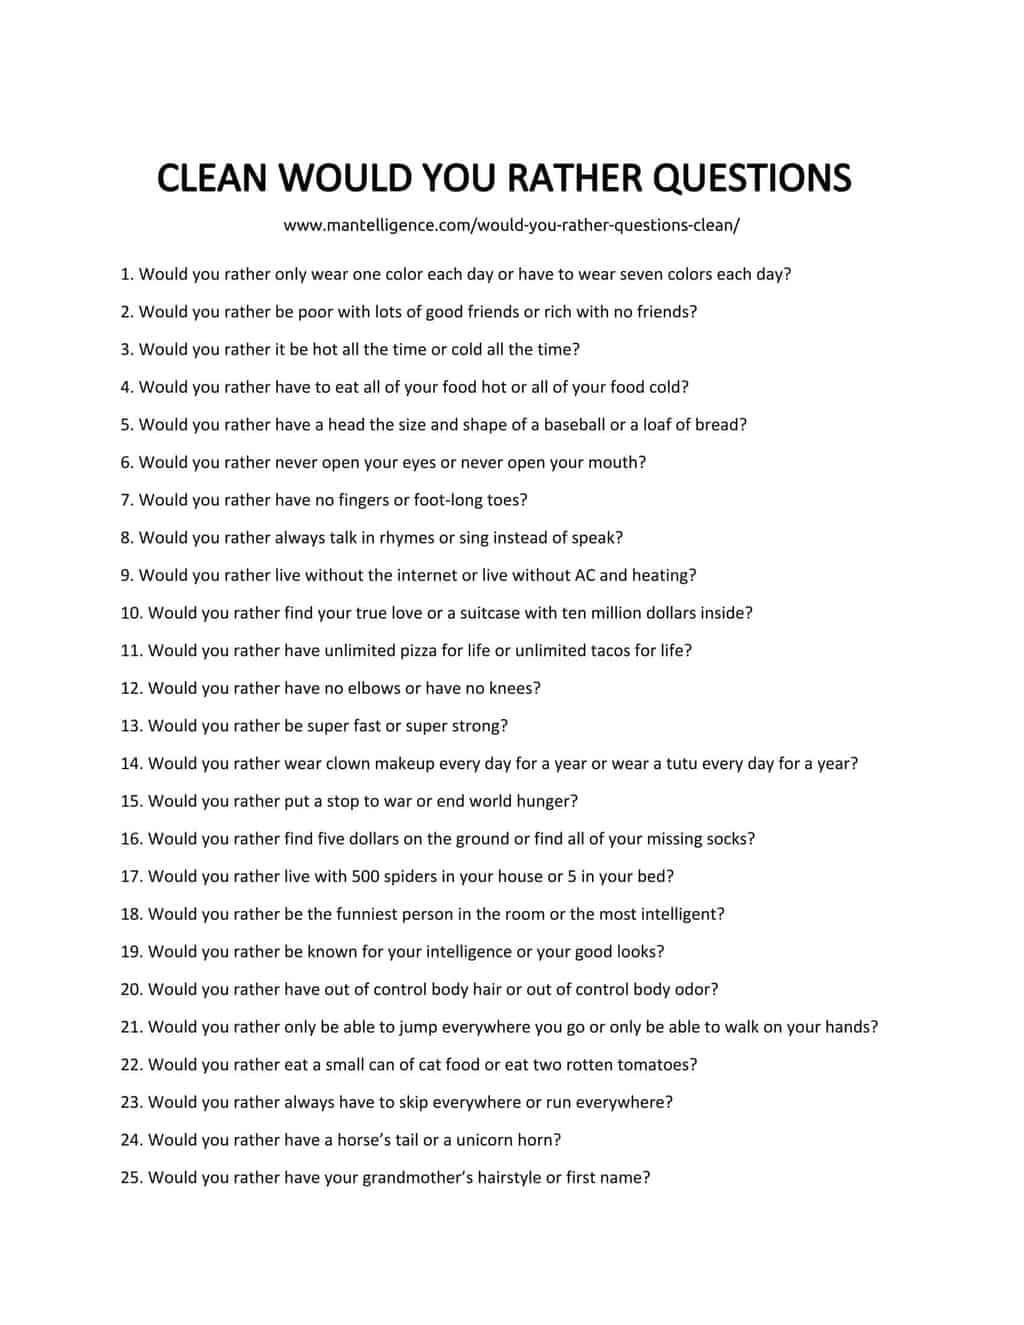 70-would-you-rather-questions-clean-not-offensive-yet-hard-to-answer